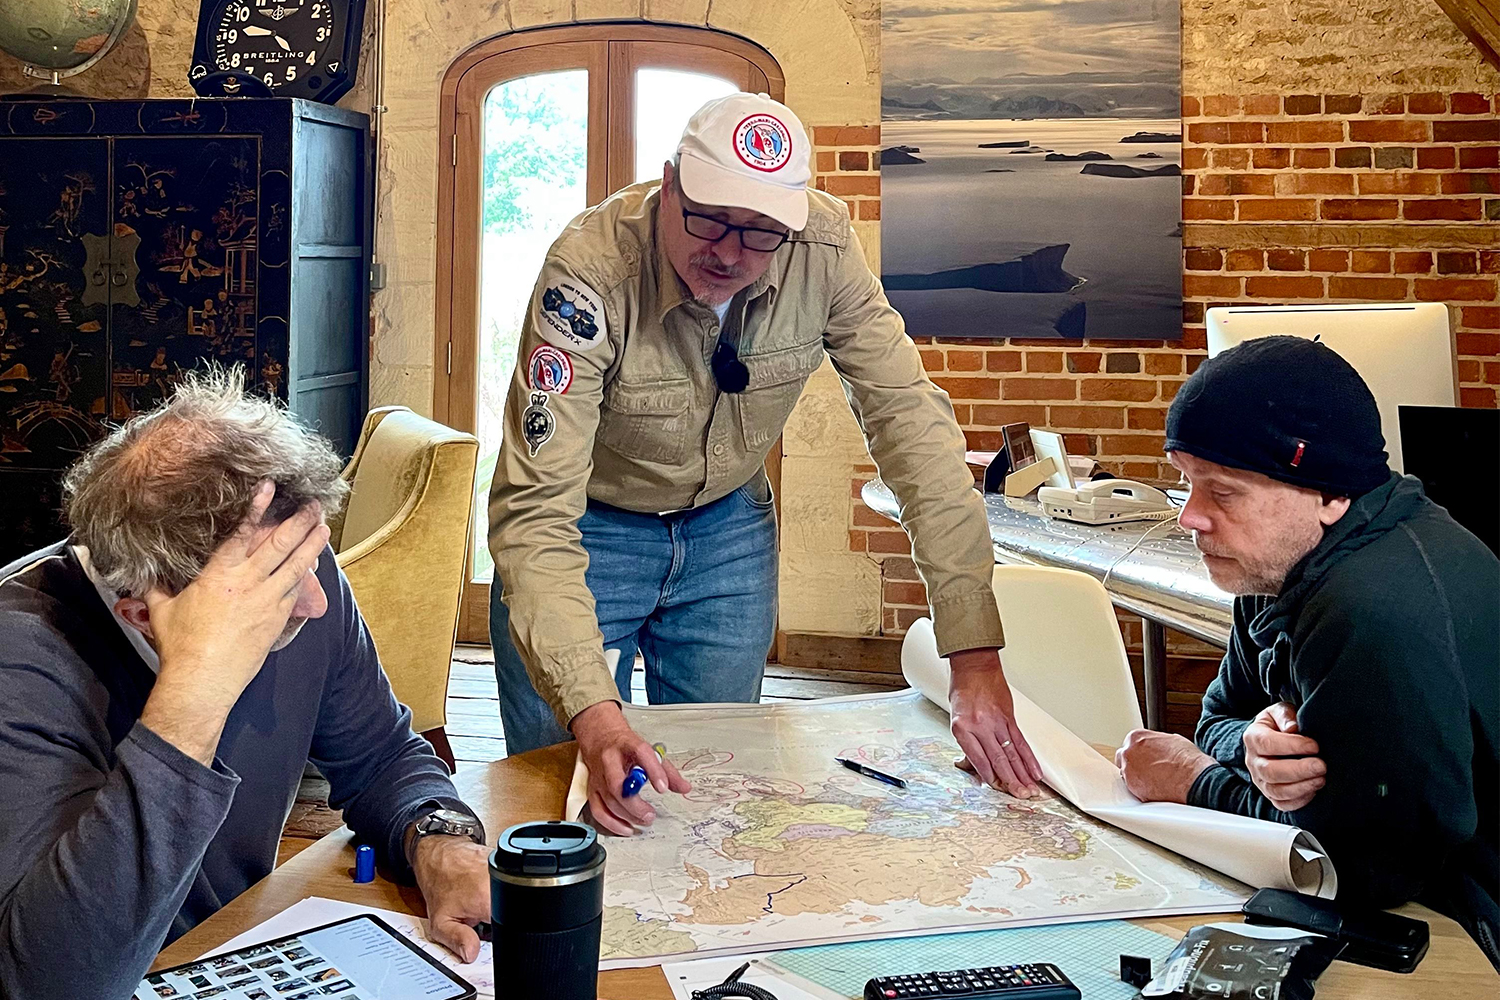 The DefenderX team looking over maps, including Steve Brooks (left), Jeff Willner (center) and Mikael Strandberg (right)